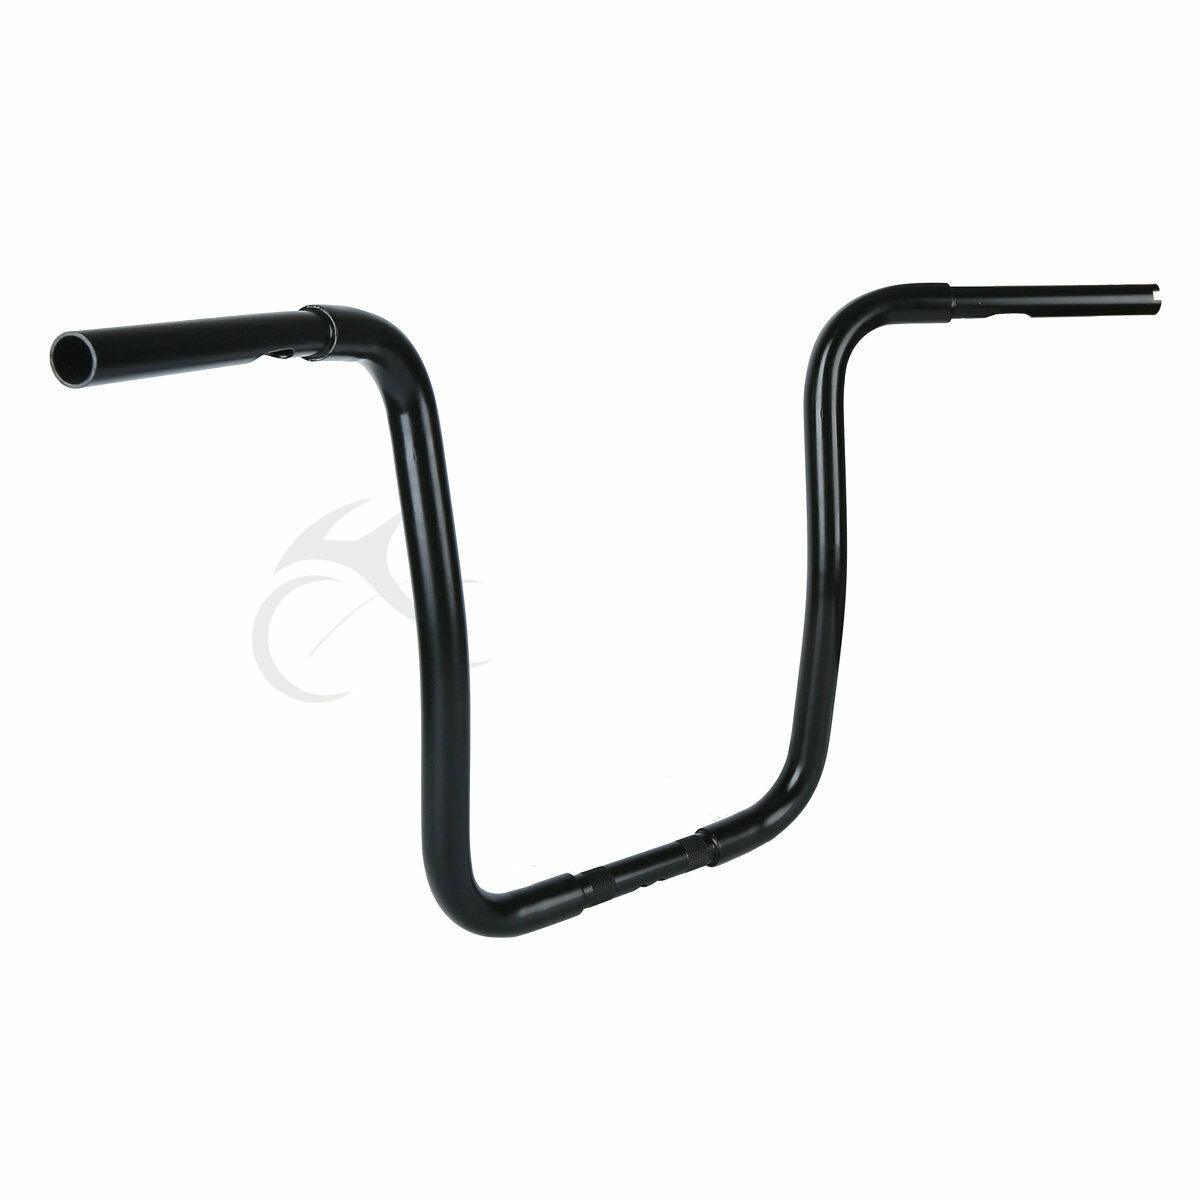 18" Rise 1-1/4" Ape Handlebar Handle Bar Fit For Harley Sportster Softail - Moto Life Products